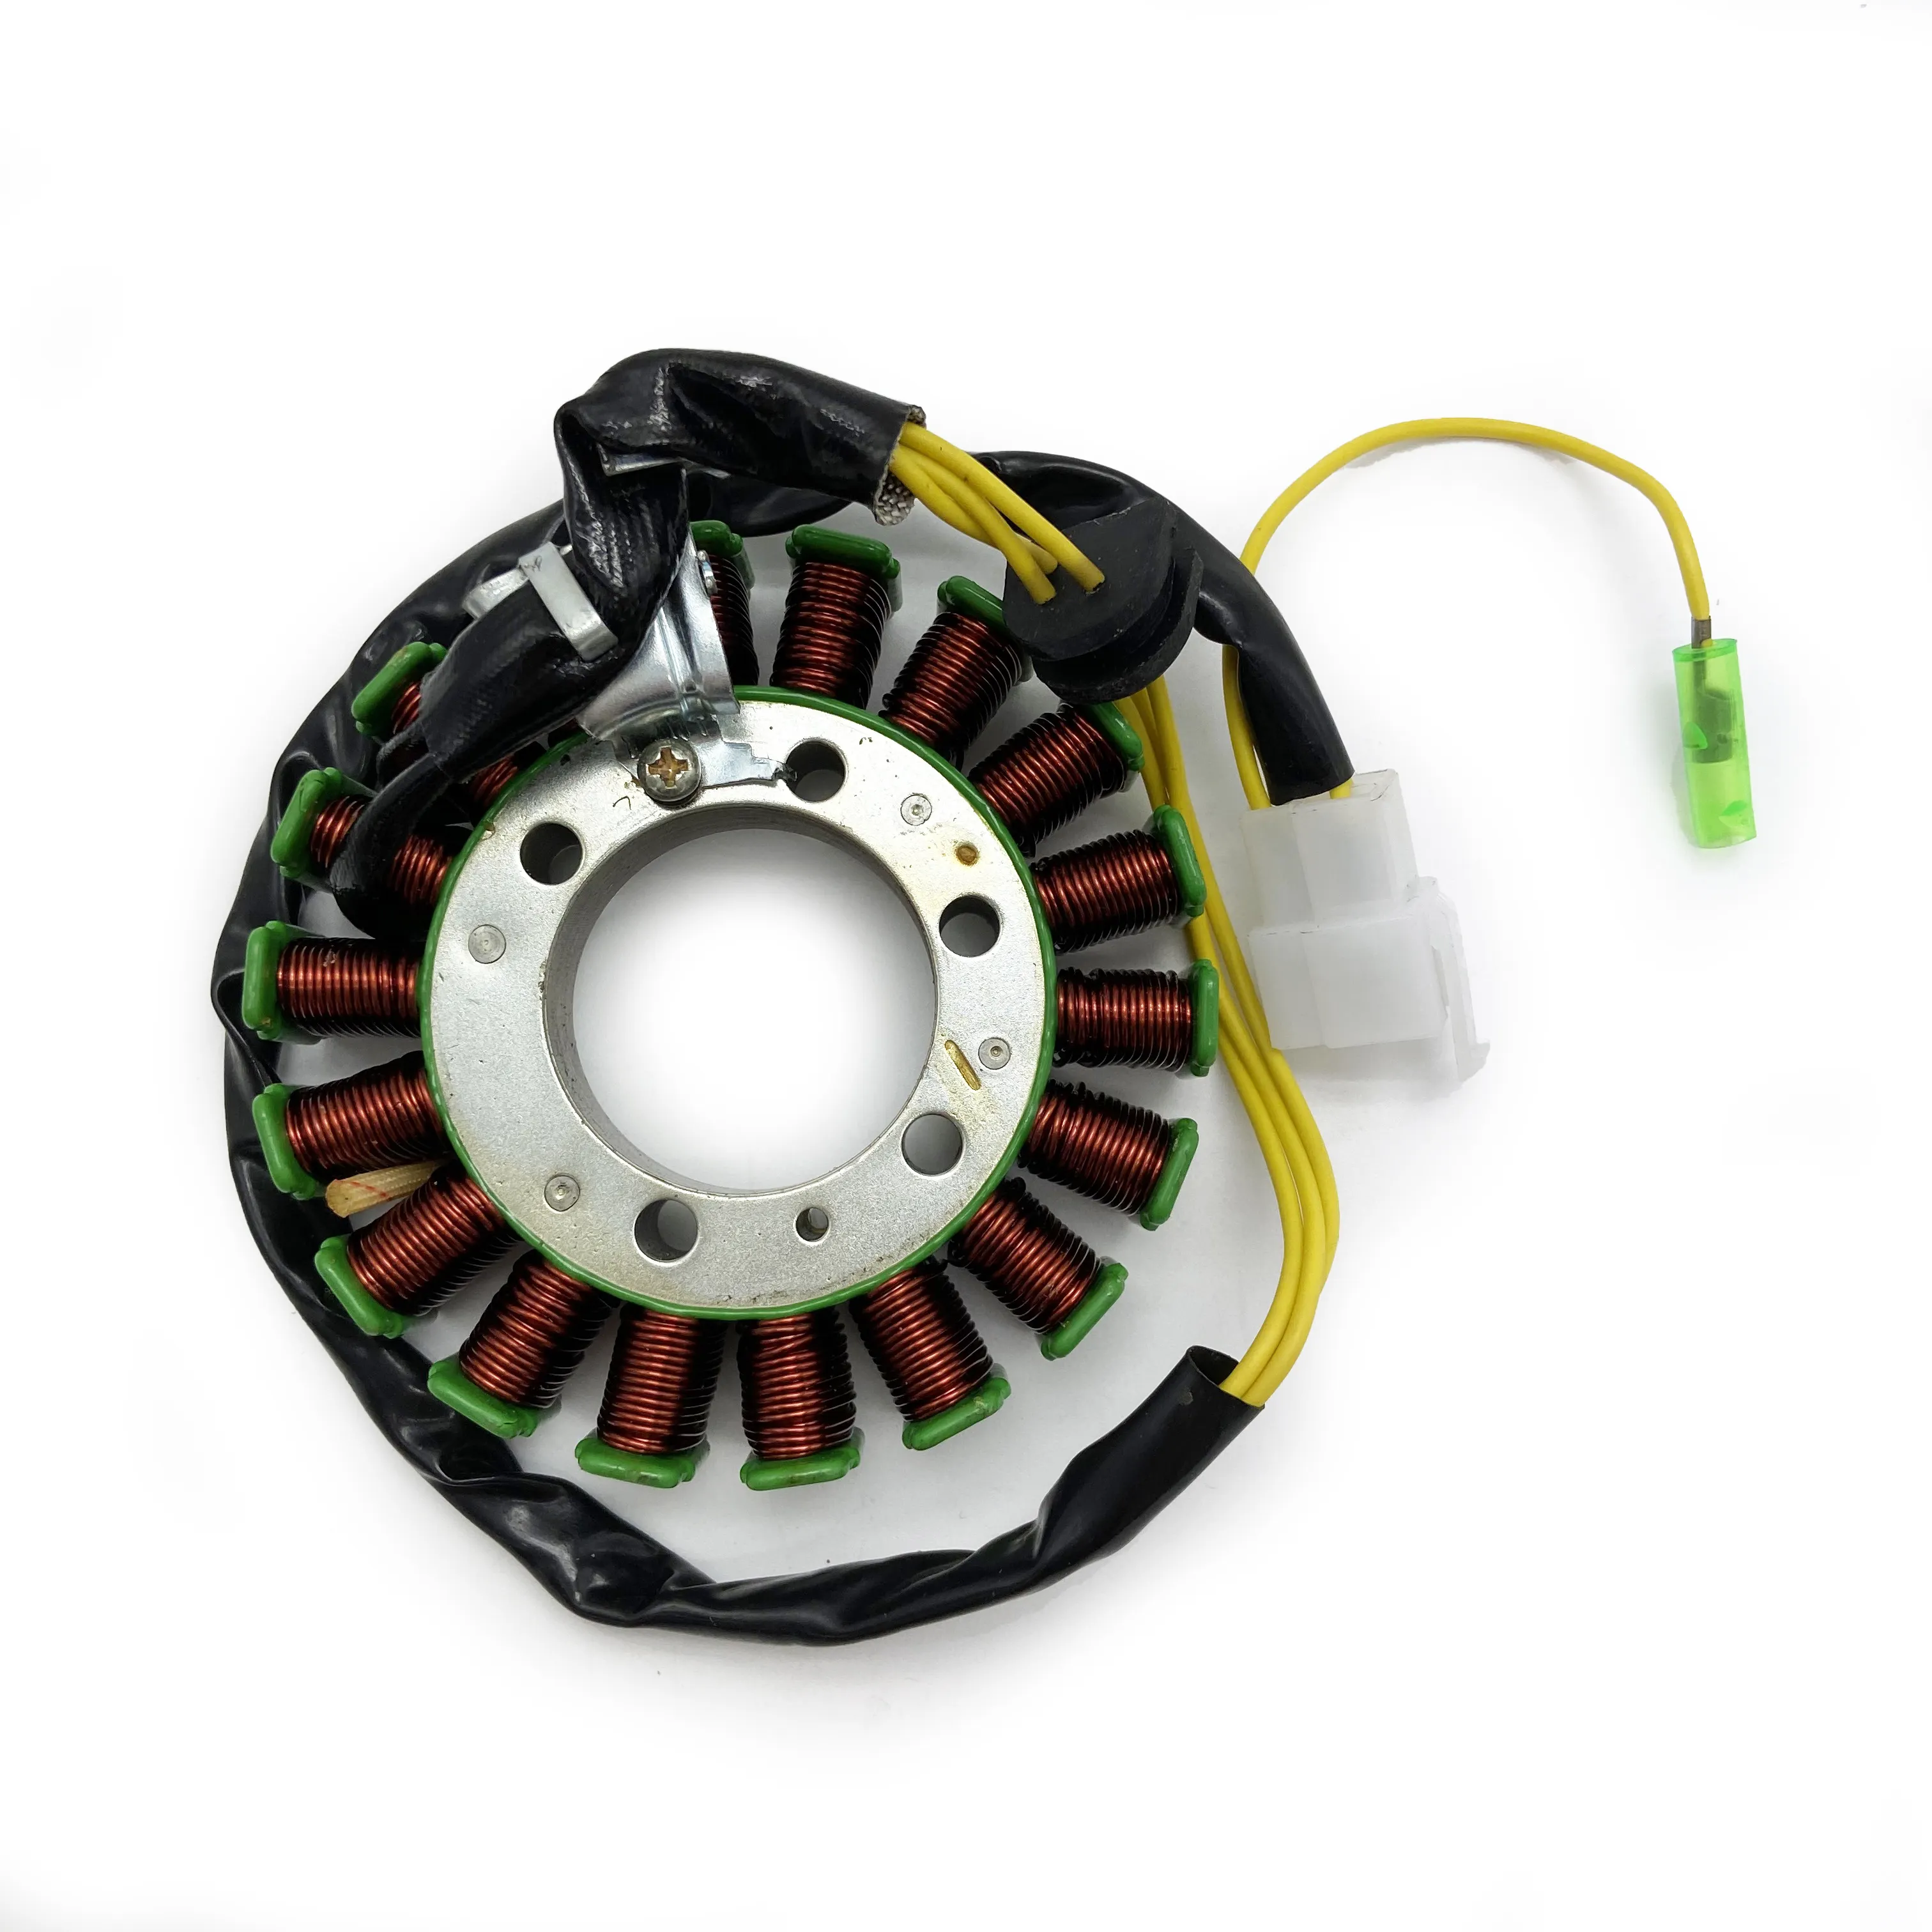 18 Poles Coils Magneto Stator For GY6 250cc Engine CF250 CF MOTO Scooter 3-Pin Female Plug New